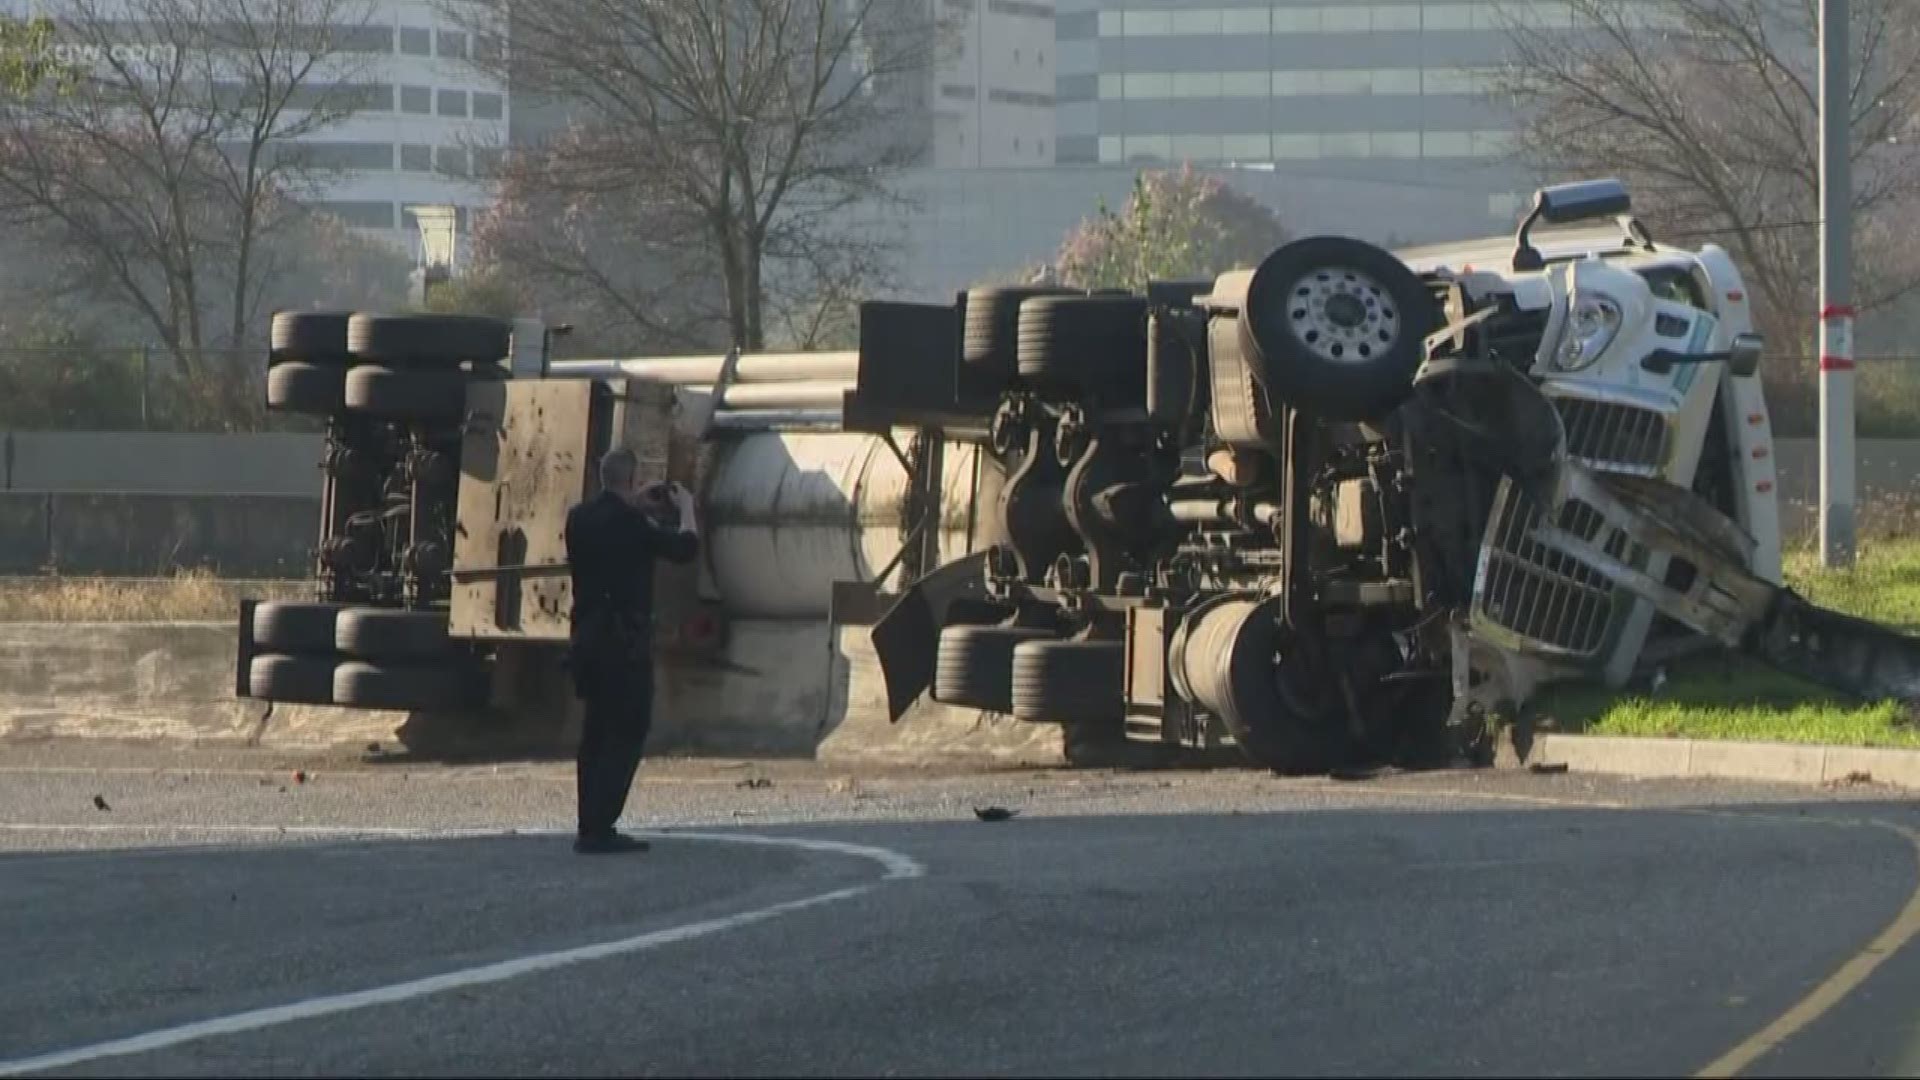 A semi trailer carrying carbon dioxide crashed into multiple cars before flipping on its side. As a precaution, ODOT closed all of I-5 for a short time.